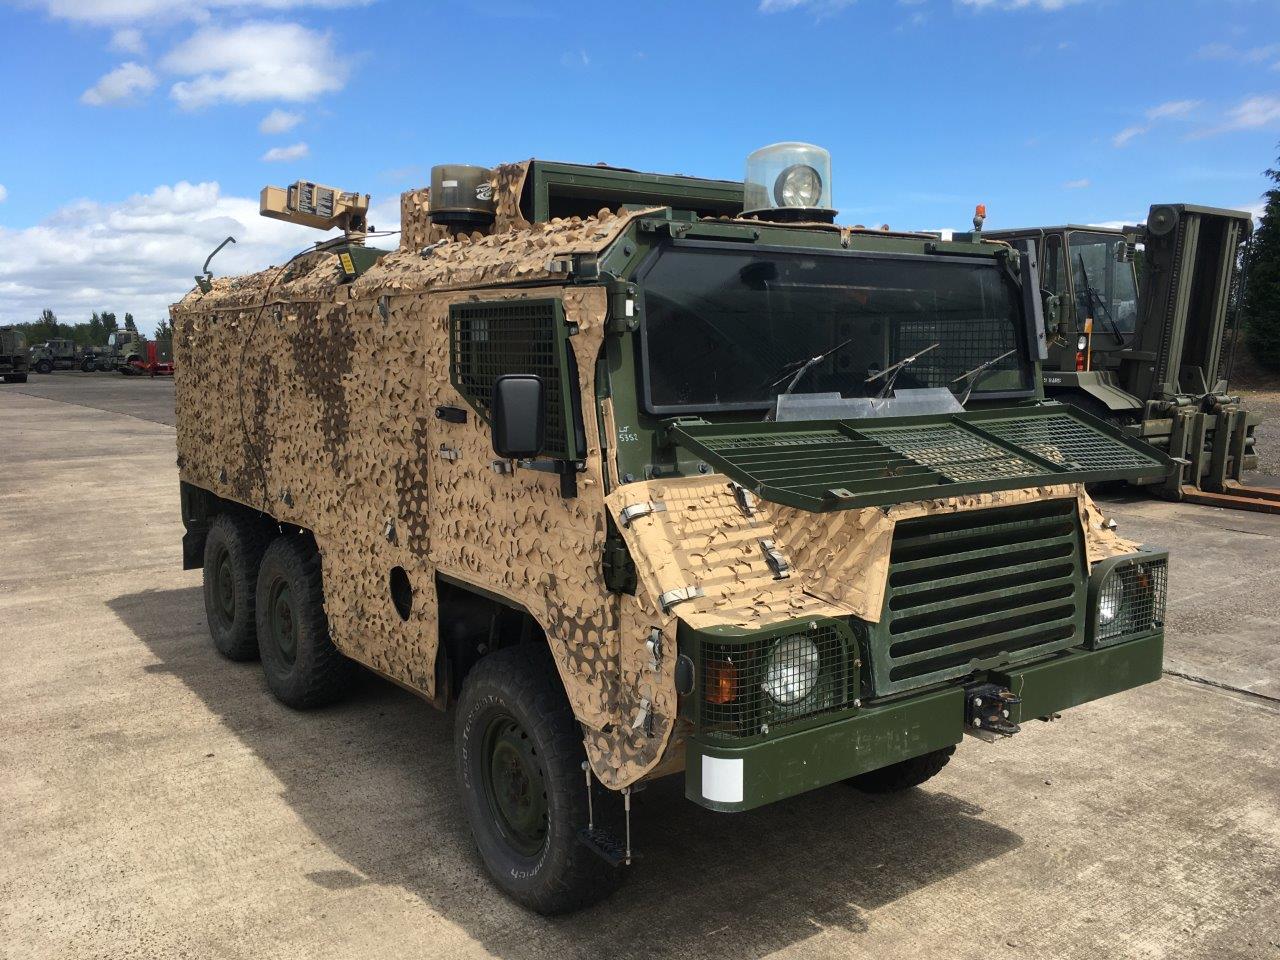 Pinzgauer Vector 718 6x6 Armoured Patrol Vehicles - Govsales of ex military vehicles for sale, mod surplus